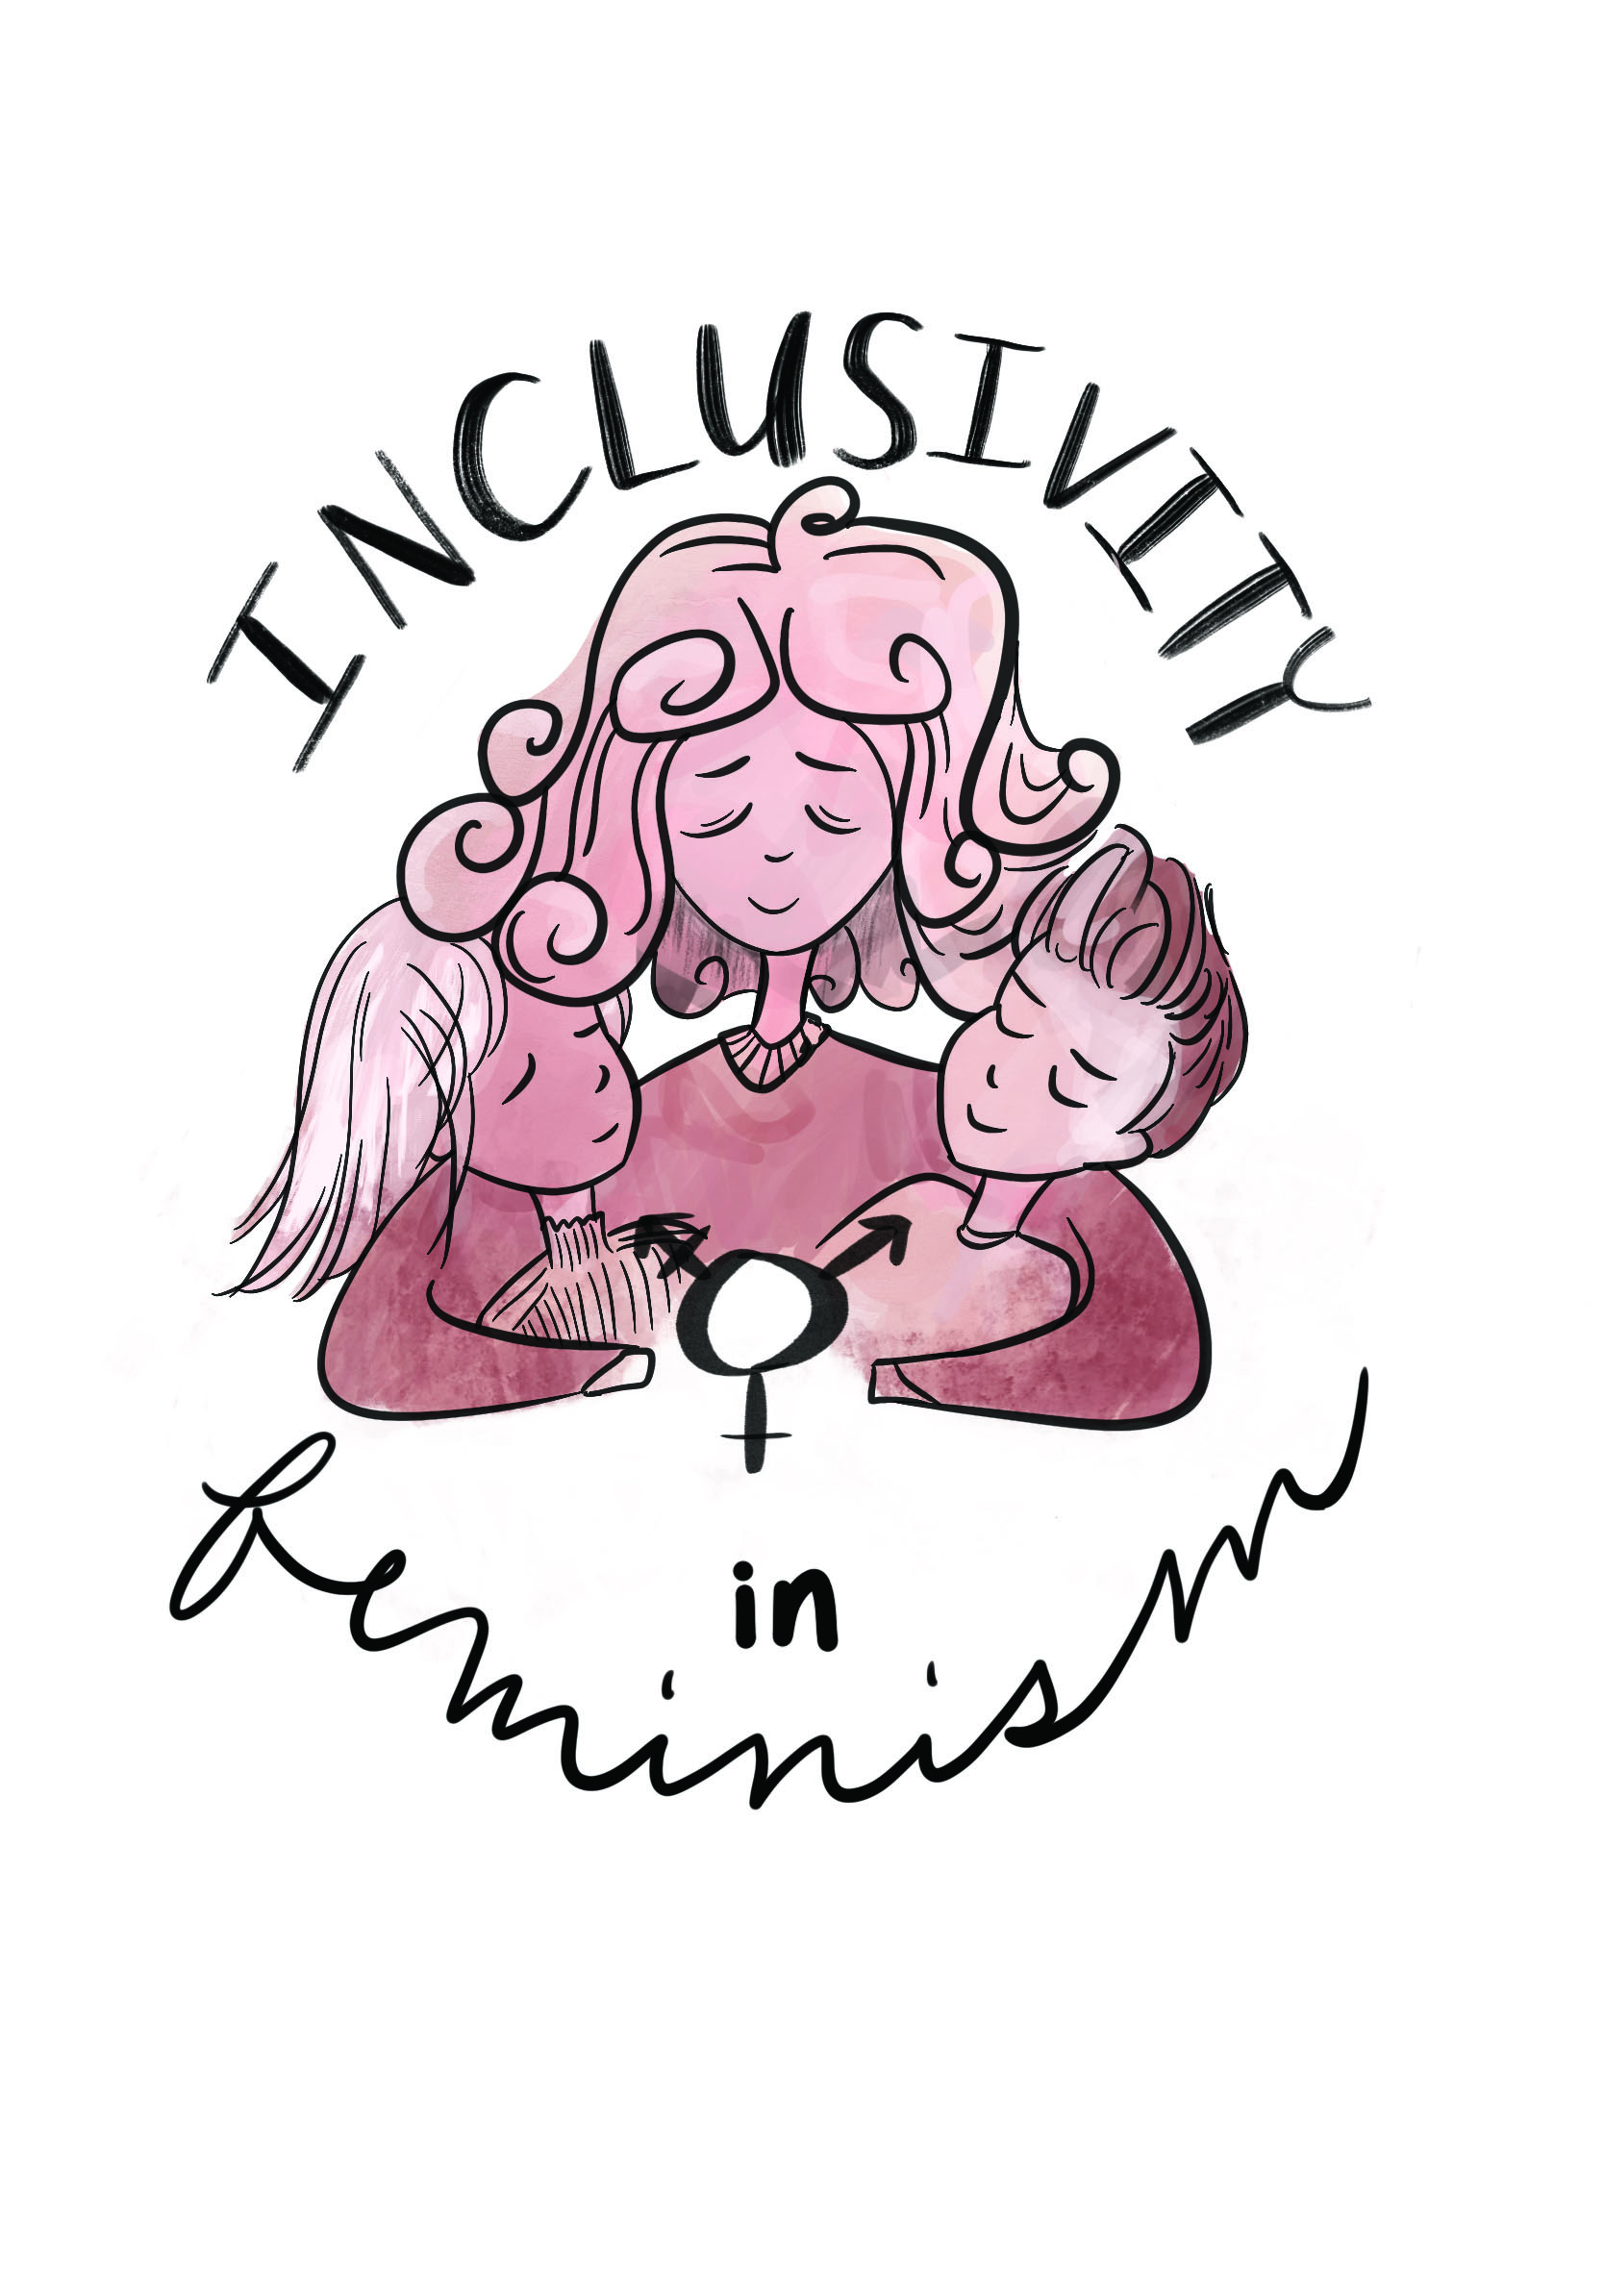 Graphic of a woman hugging two other people with the intersectional feminism symbol in the middle with the words "Inclusivity in feminism" written,